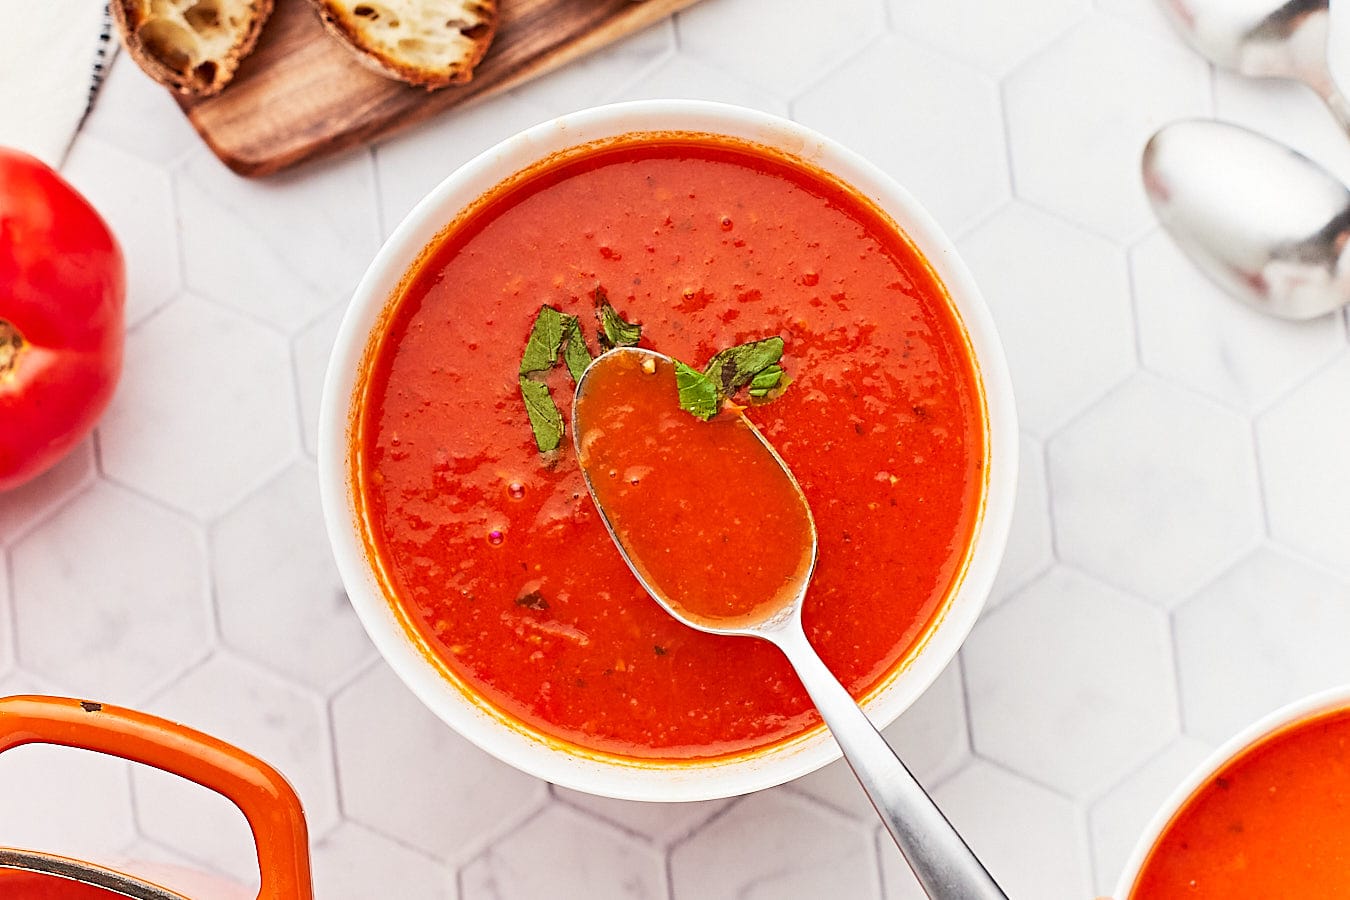 Tomato Soup Recipe by Cheerful Cook.